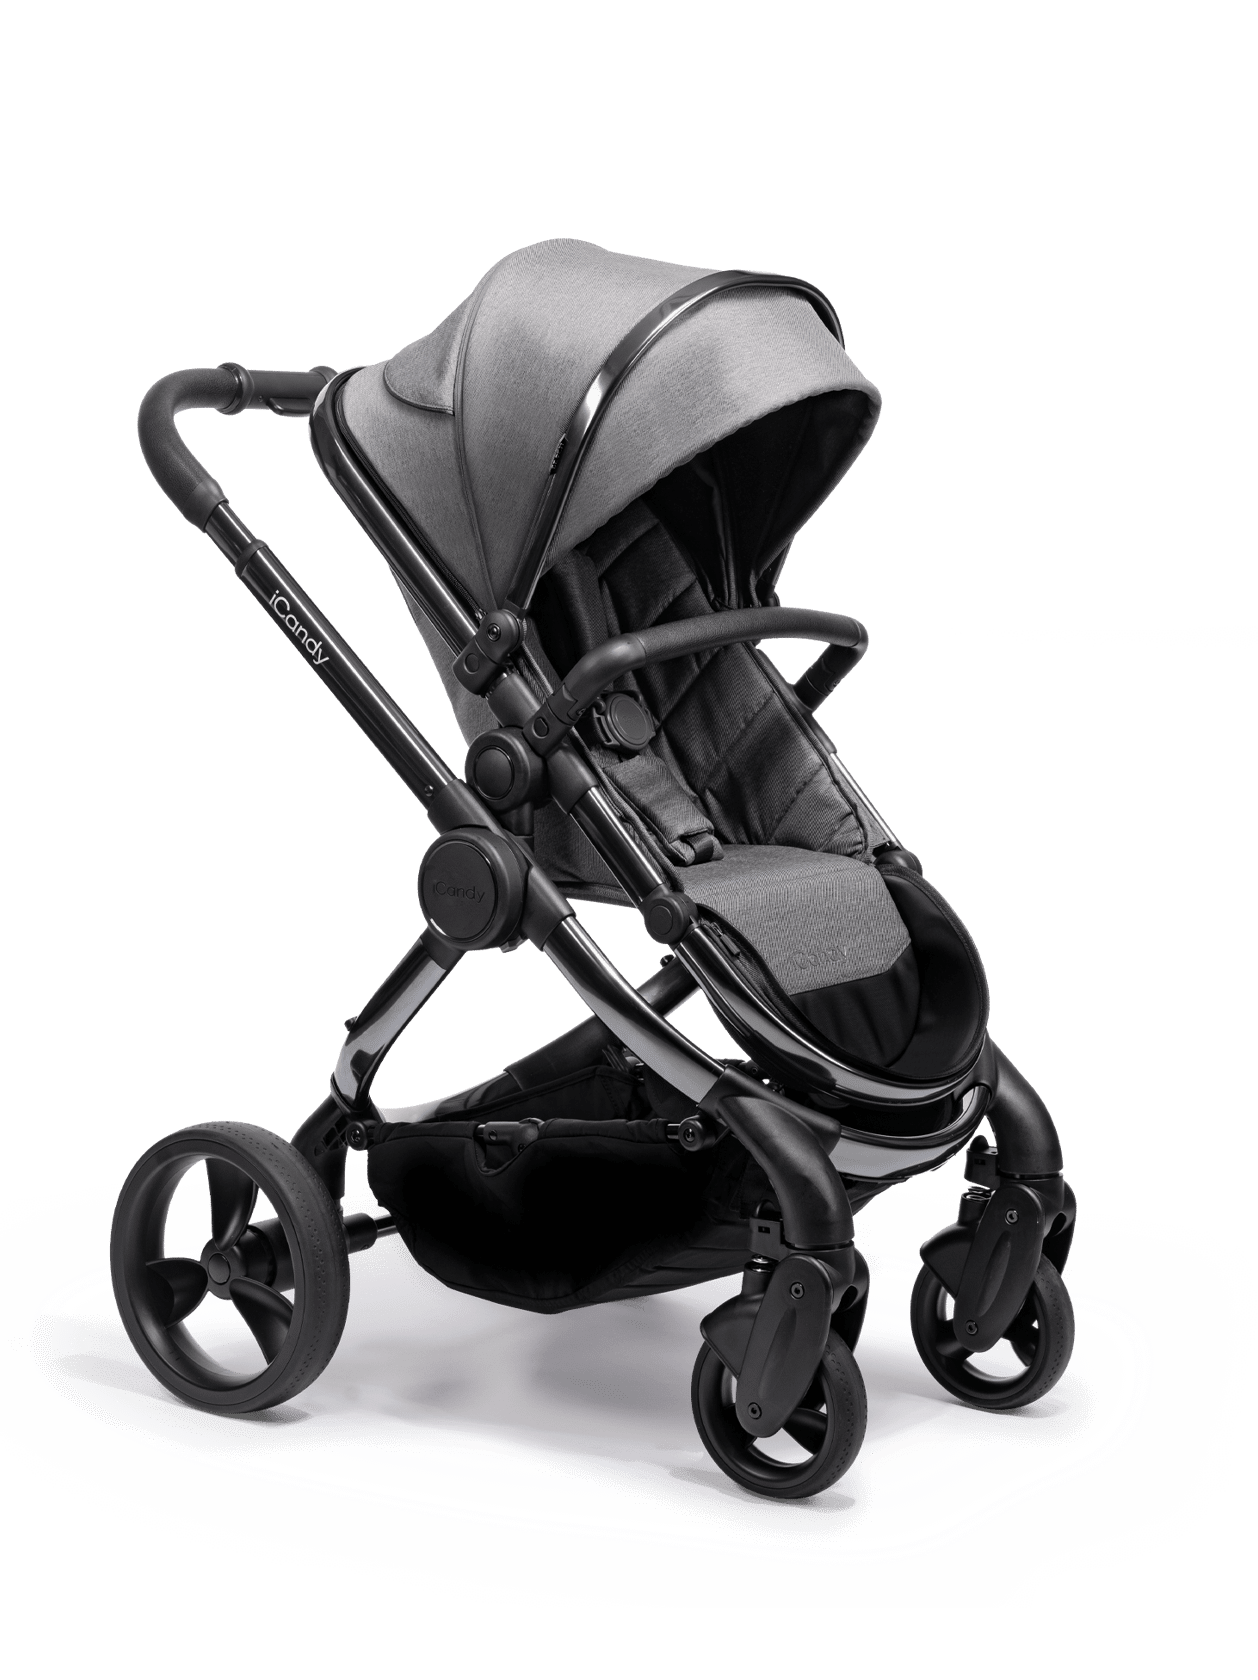 Peach Pushchair and Carrycot 